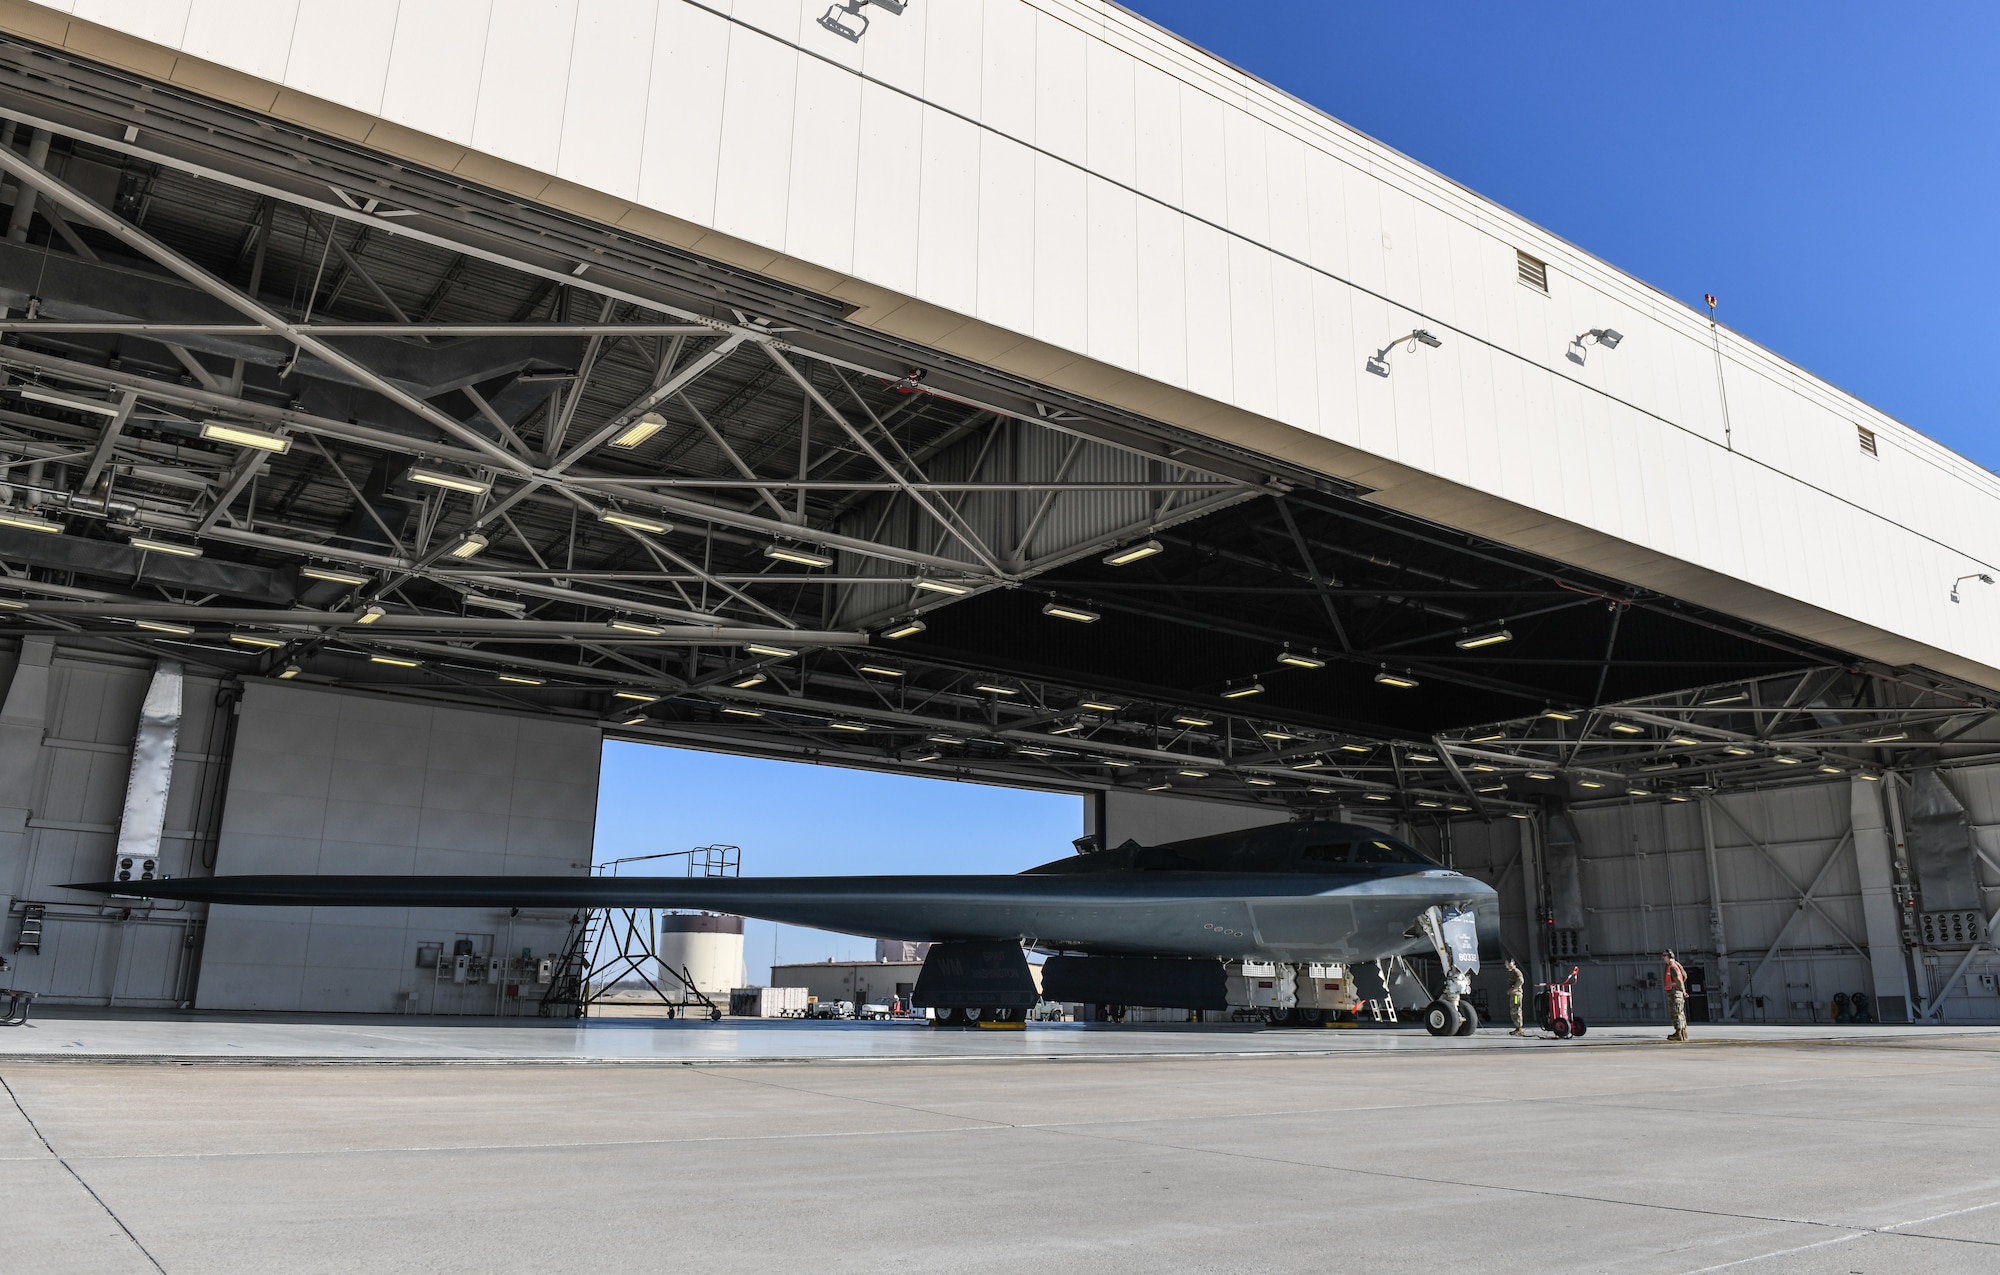 U.S. Air Force crew chiefs assigned to the Air National Guard's 131st Bomb Wing ready their B-2 Spirit for flight at Whiteman Air Force Base, Missouri, March 8, 2020. The B-2 took off from Whiteman AFB to support U.S. Strategic Command Bomber Task Force operations in Europe. The 131st Bomb Wing is the total-force partner unit to the 509th Bomb Wing.  (U.S. Air Force photo by Tech. Sgt. Alexander W. Riedel)